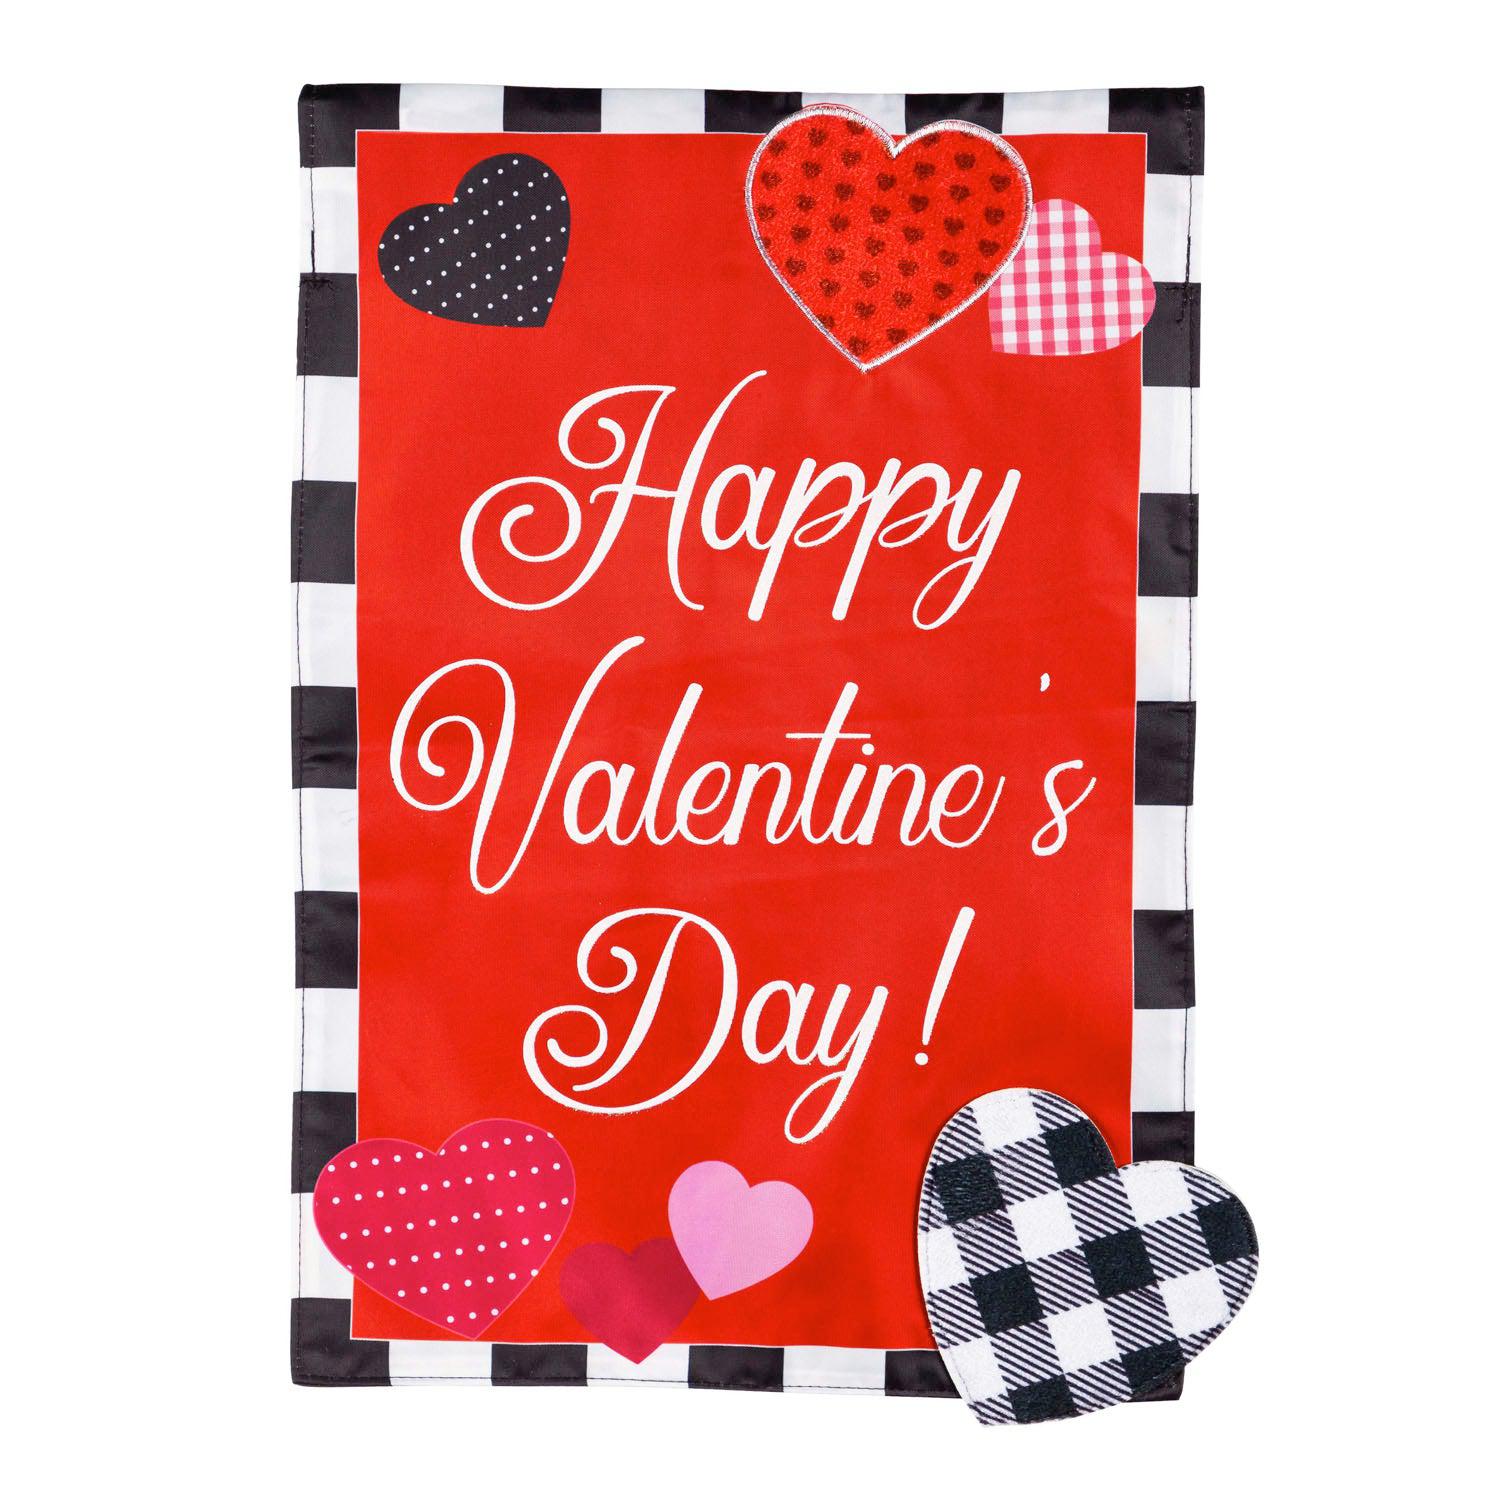 The Valentine's Day Check Border house banner features a bright red background with a black and white checked border, patterned hearts, and the words "Happy Valentine's Day". 